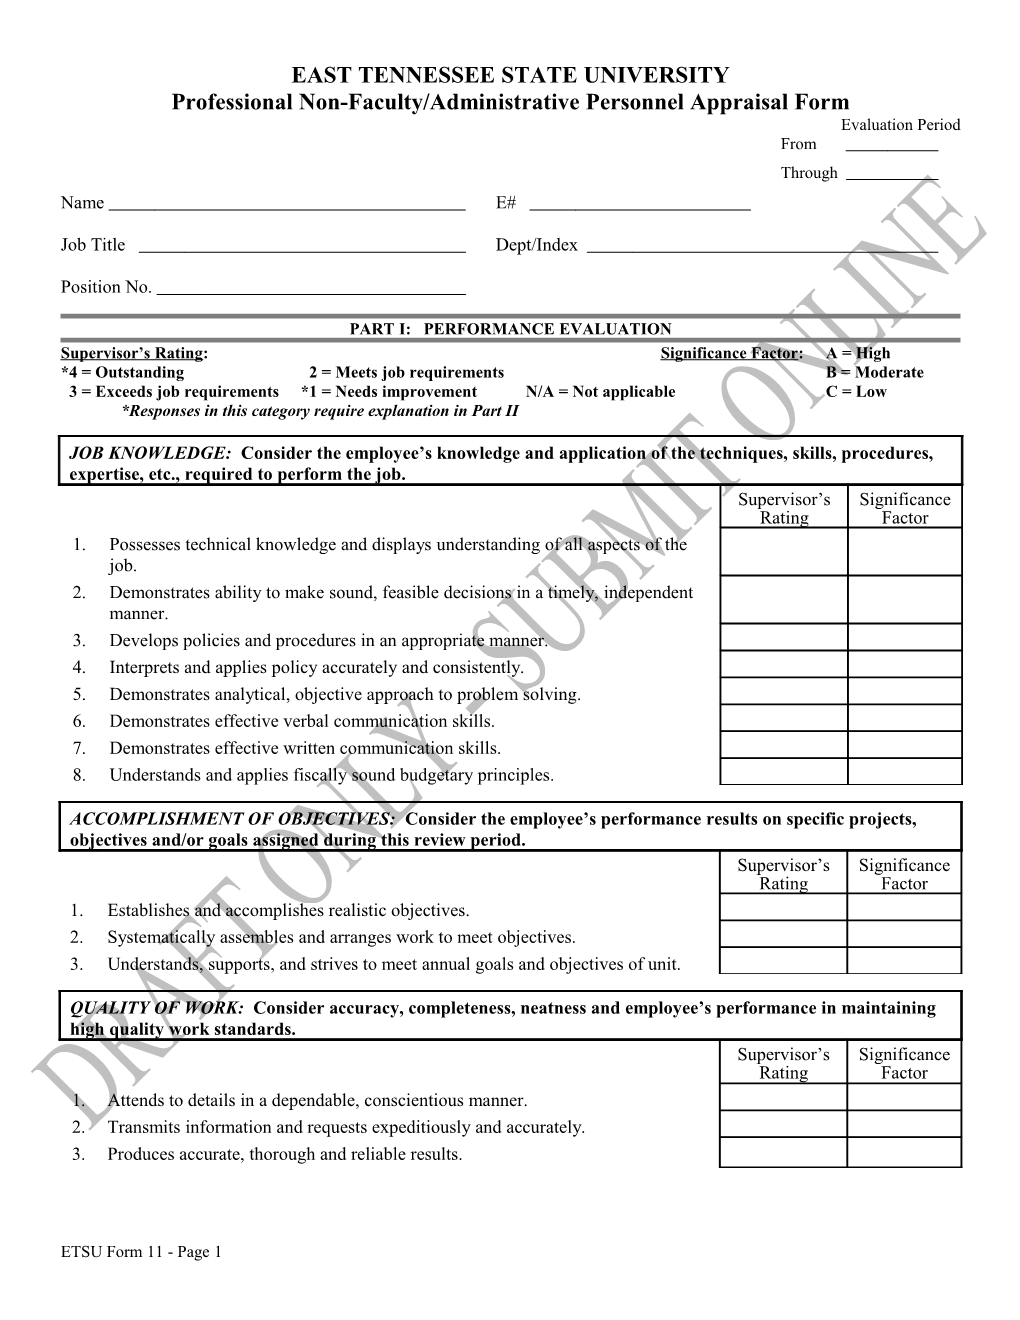 Professional Non-Faculty/Administrative Personnel Appraisal Form